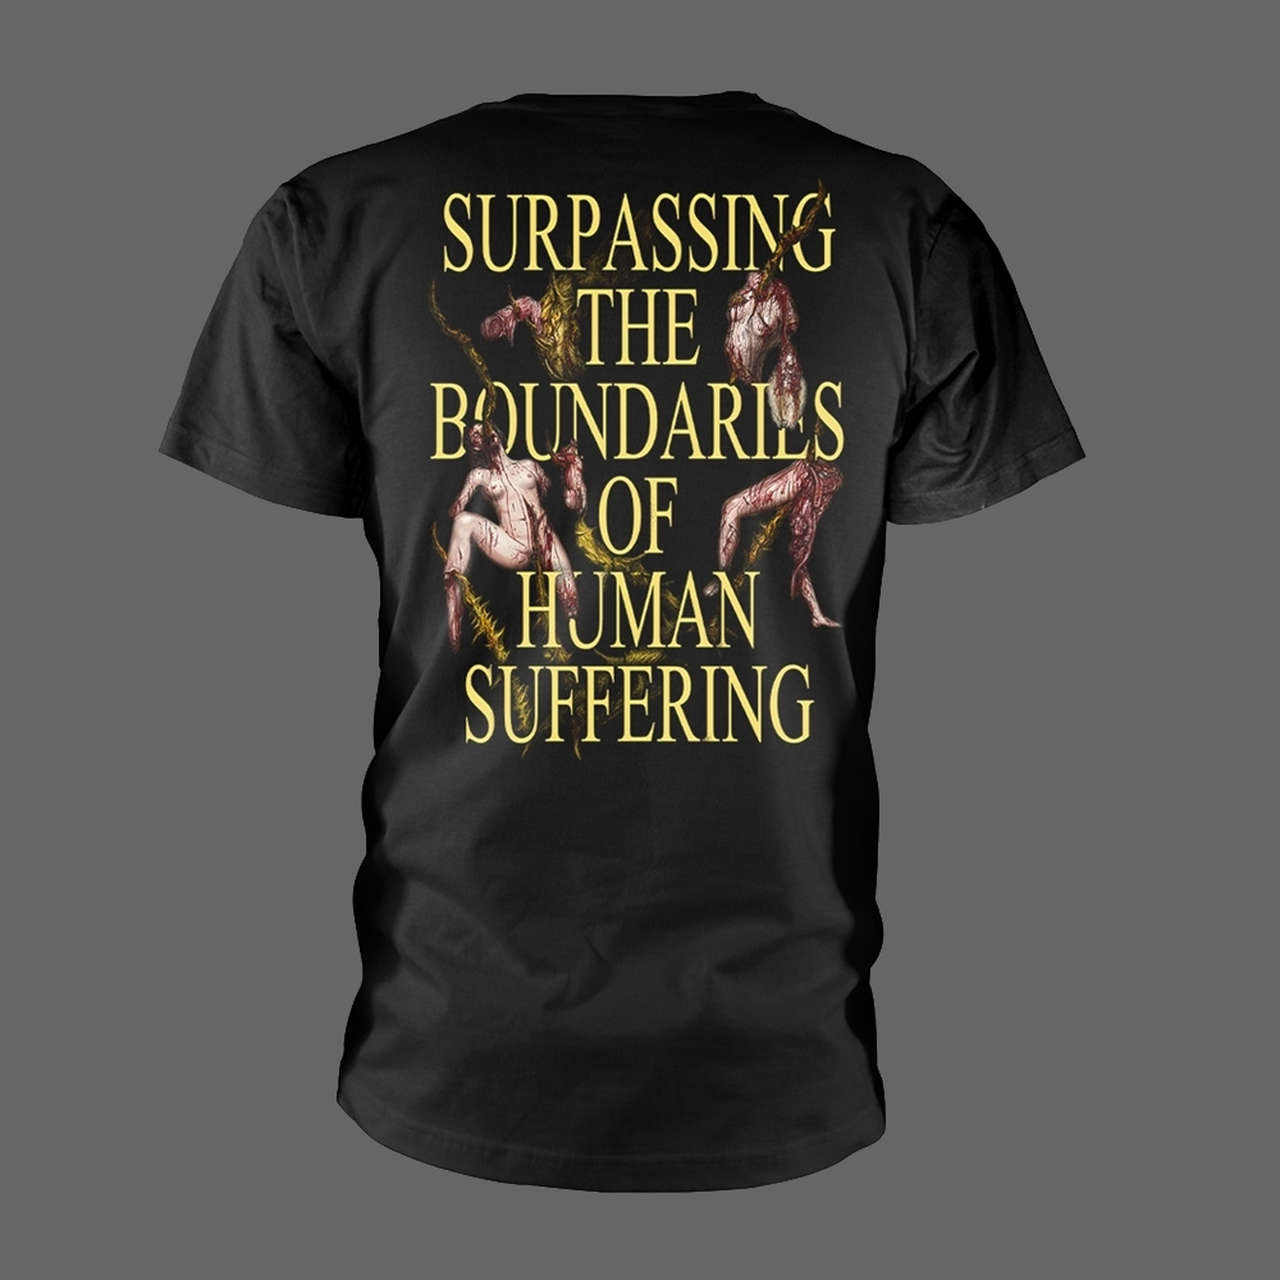 Ingested - Surpassing the Boundaries of Human Suffering (T-Shirt)